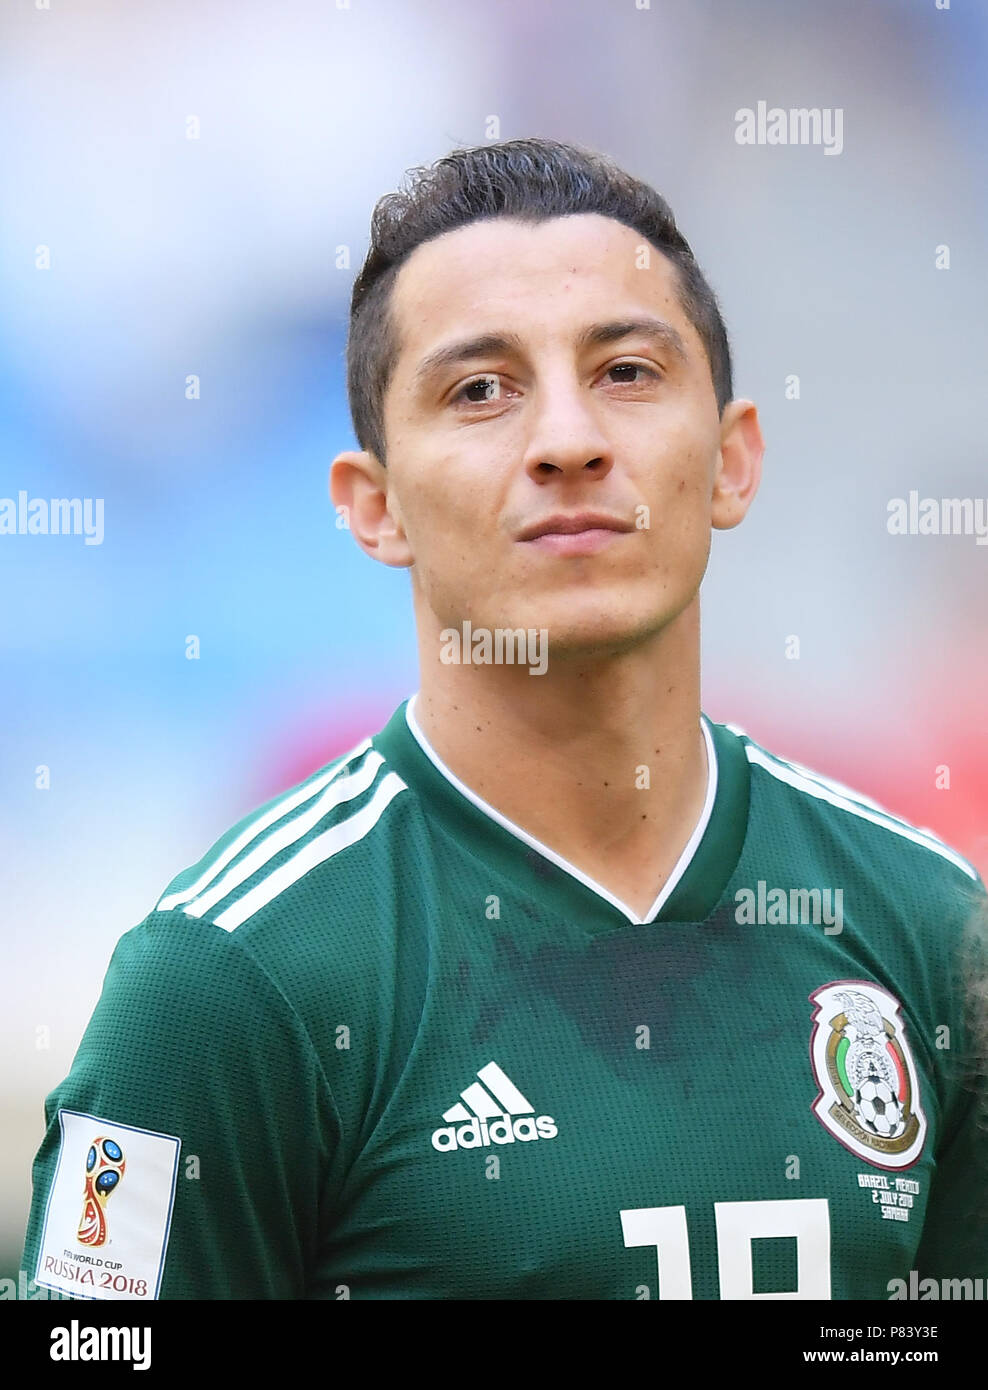 SAMARA, RUSSIA - JULY 02: Andres Guardado of Mexico during the 2018 FIFA World Cup Russia Round of 16 match between Brazil and Mexico at Samara Arena on July 2, 2018 in Samara, Russia. (Photo by Lukasz Laskowski/PressFocus/MB Media) Stock Photo